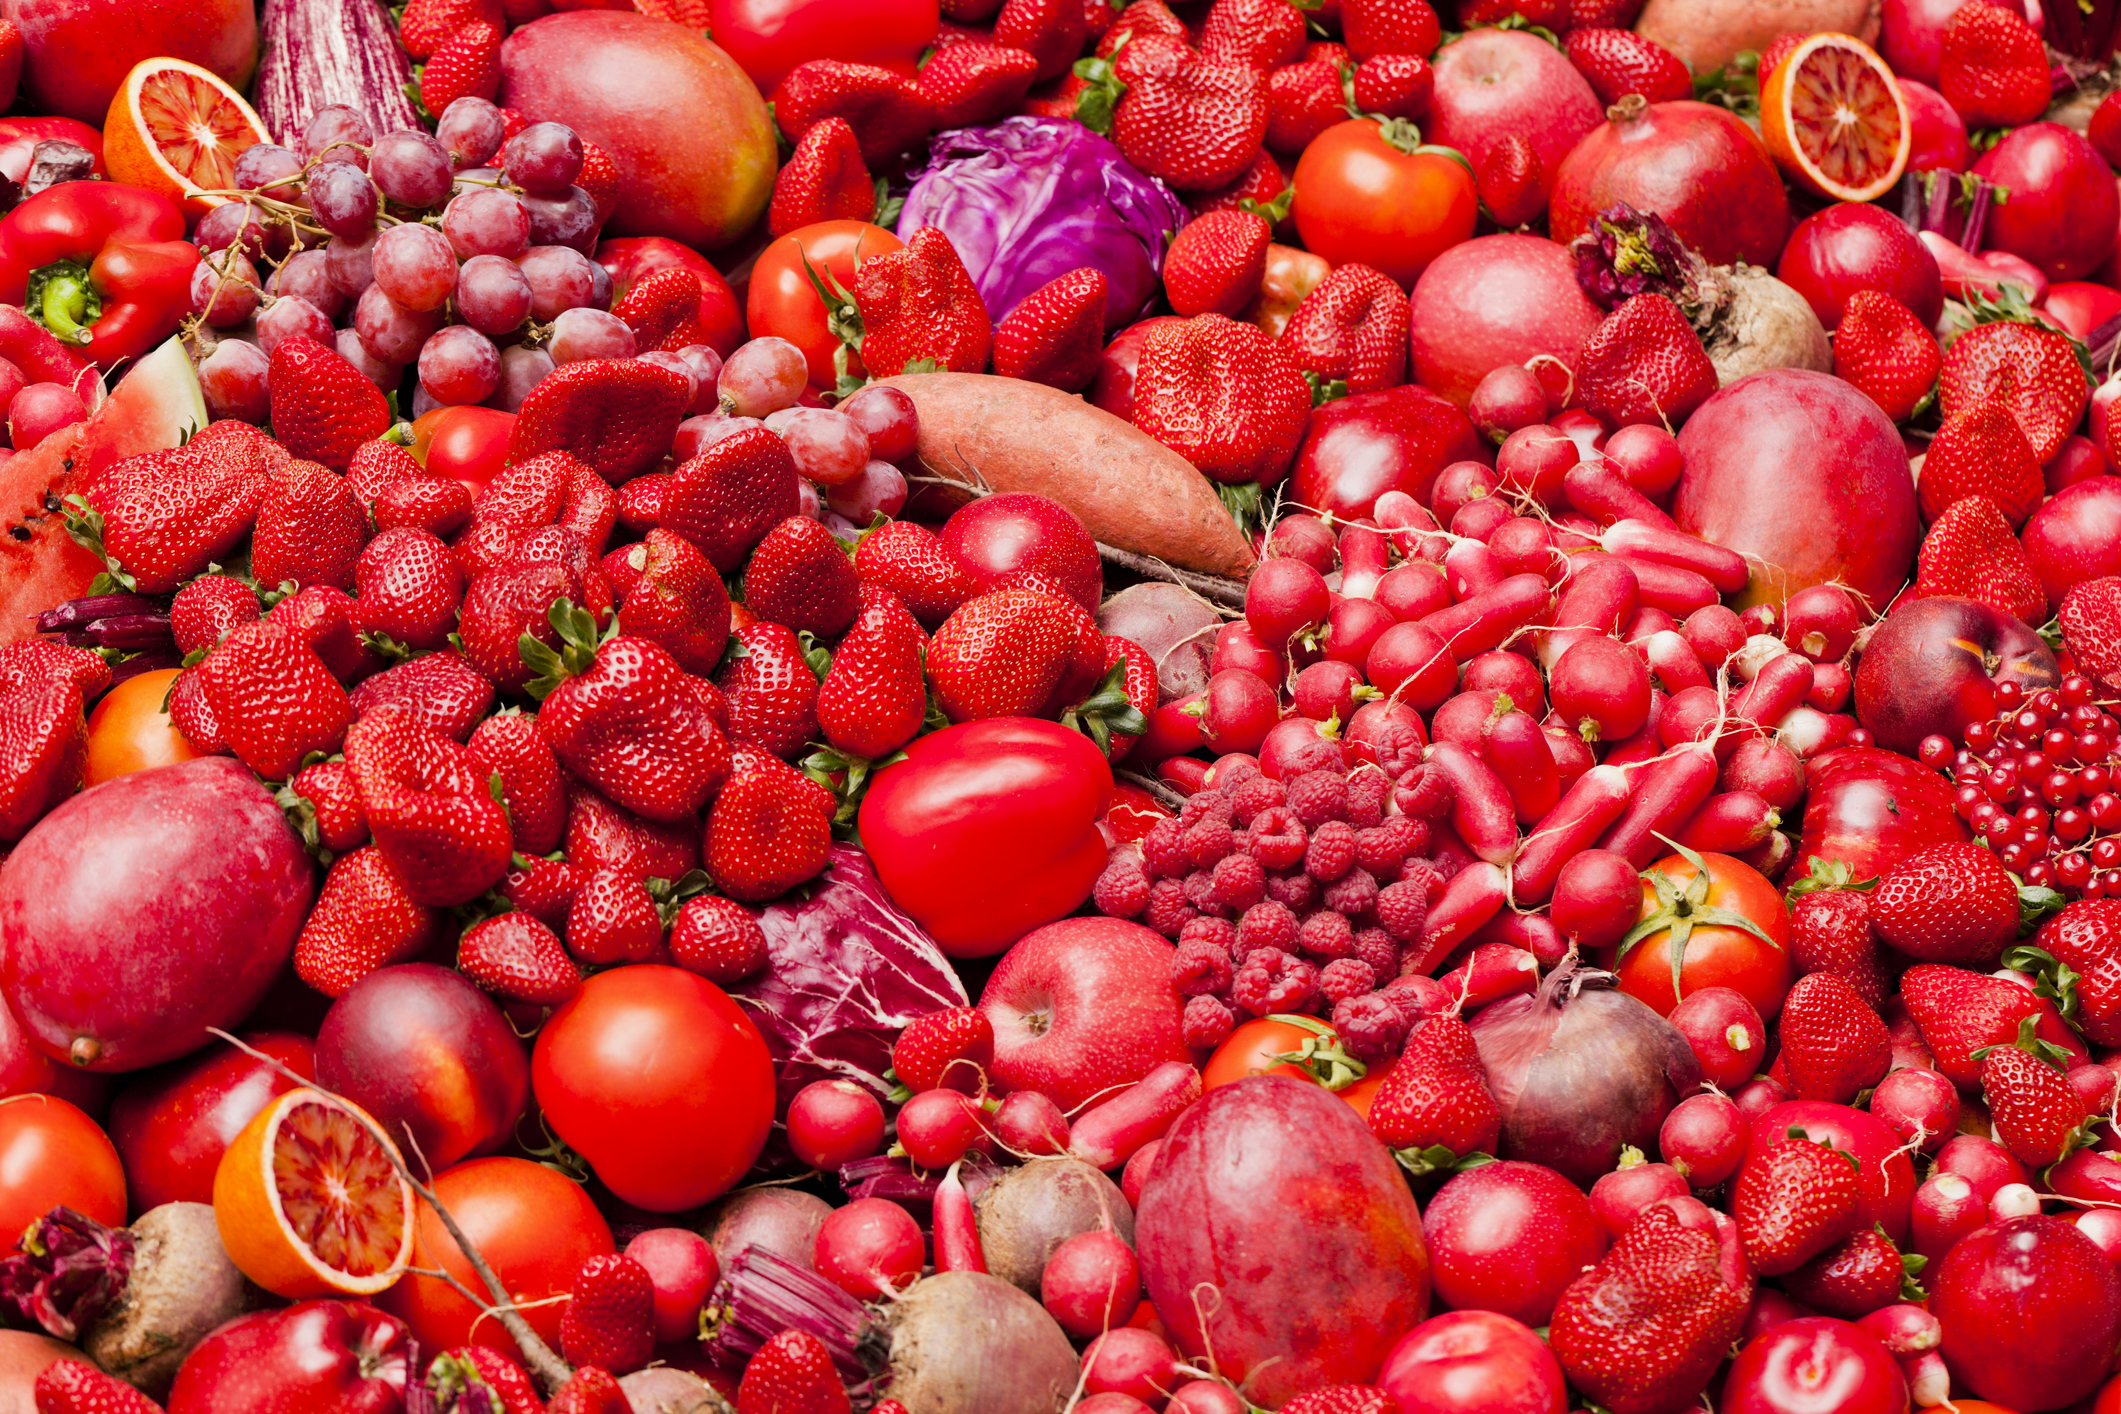 Pile of red fruits and vegetables including tomatoes, strawberries, peppers and more